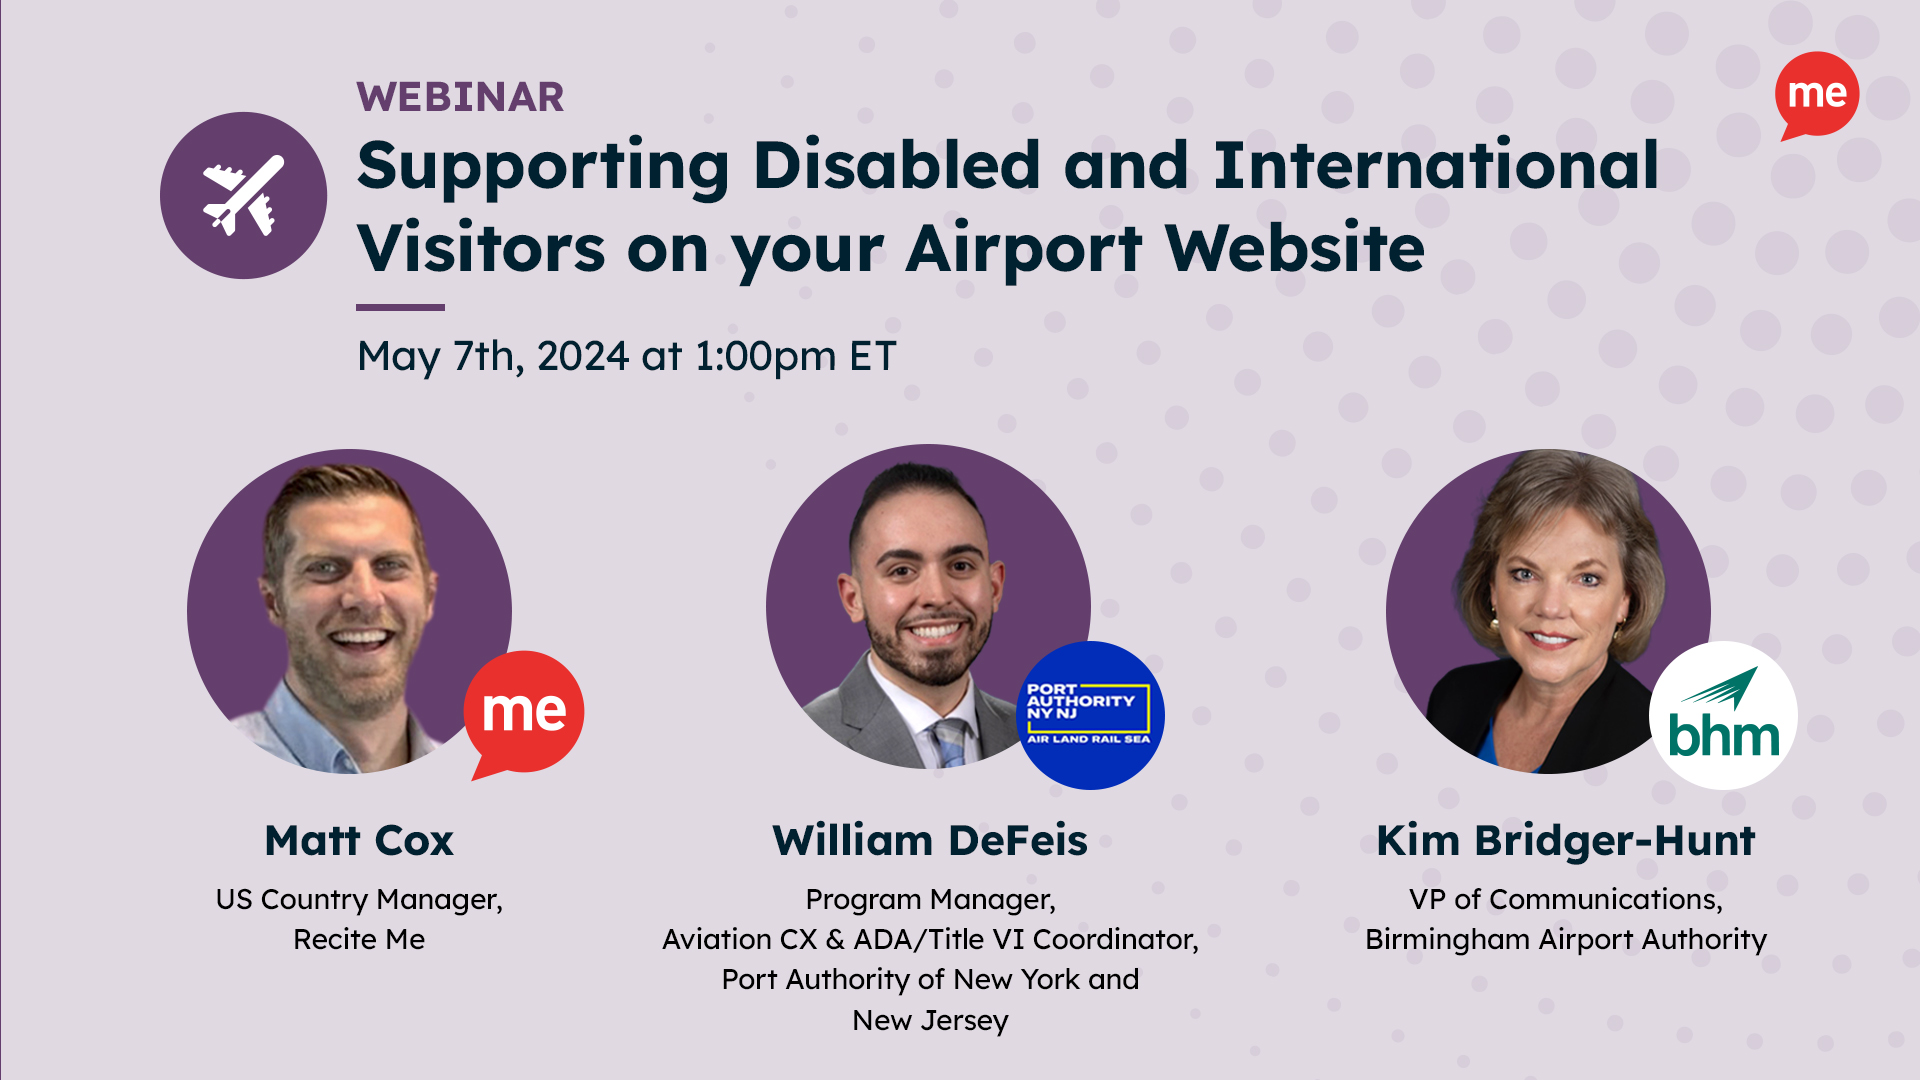 Webinar: Supporting Disabled and International Visitors on Your Airport Website. May 7th 2024, 1-2pm Easter Time. Below are headshots of each panelist.